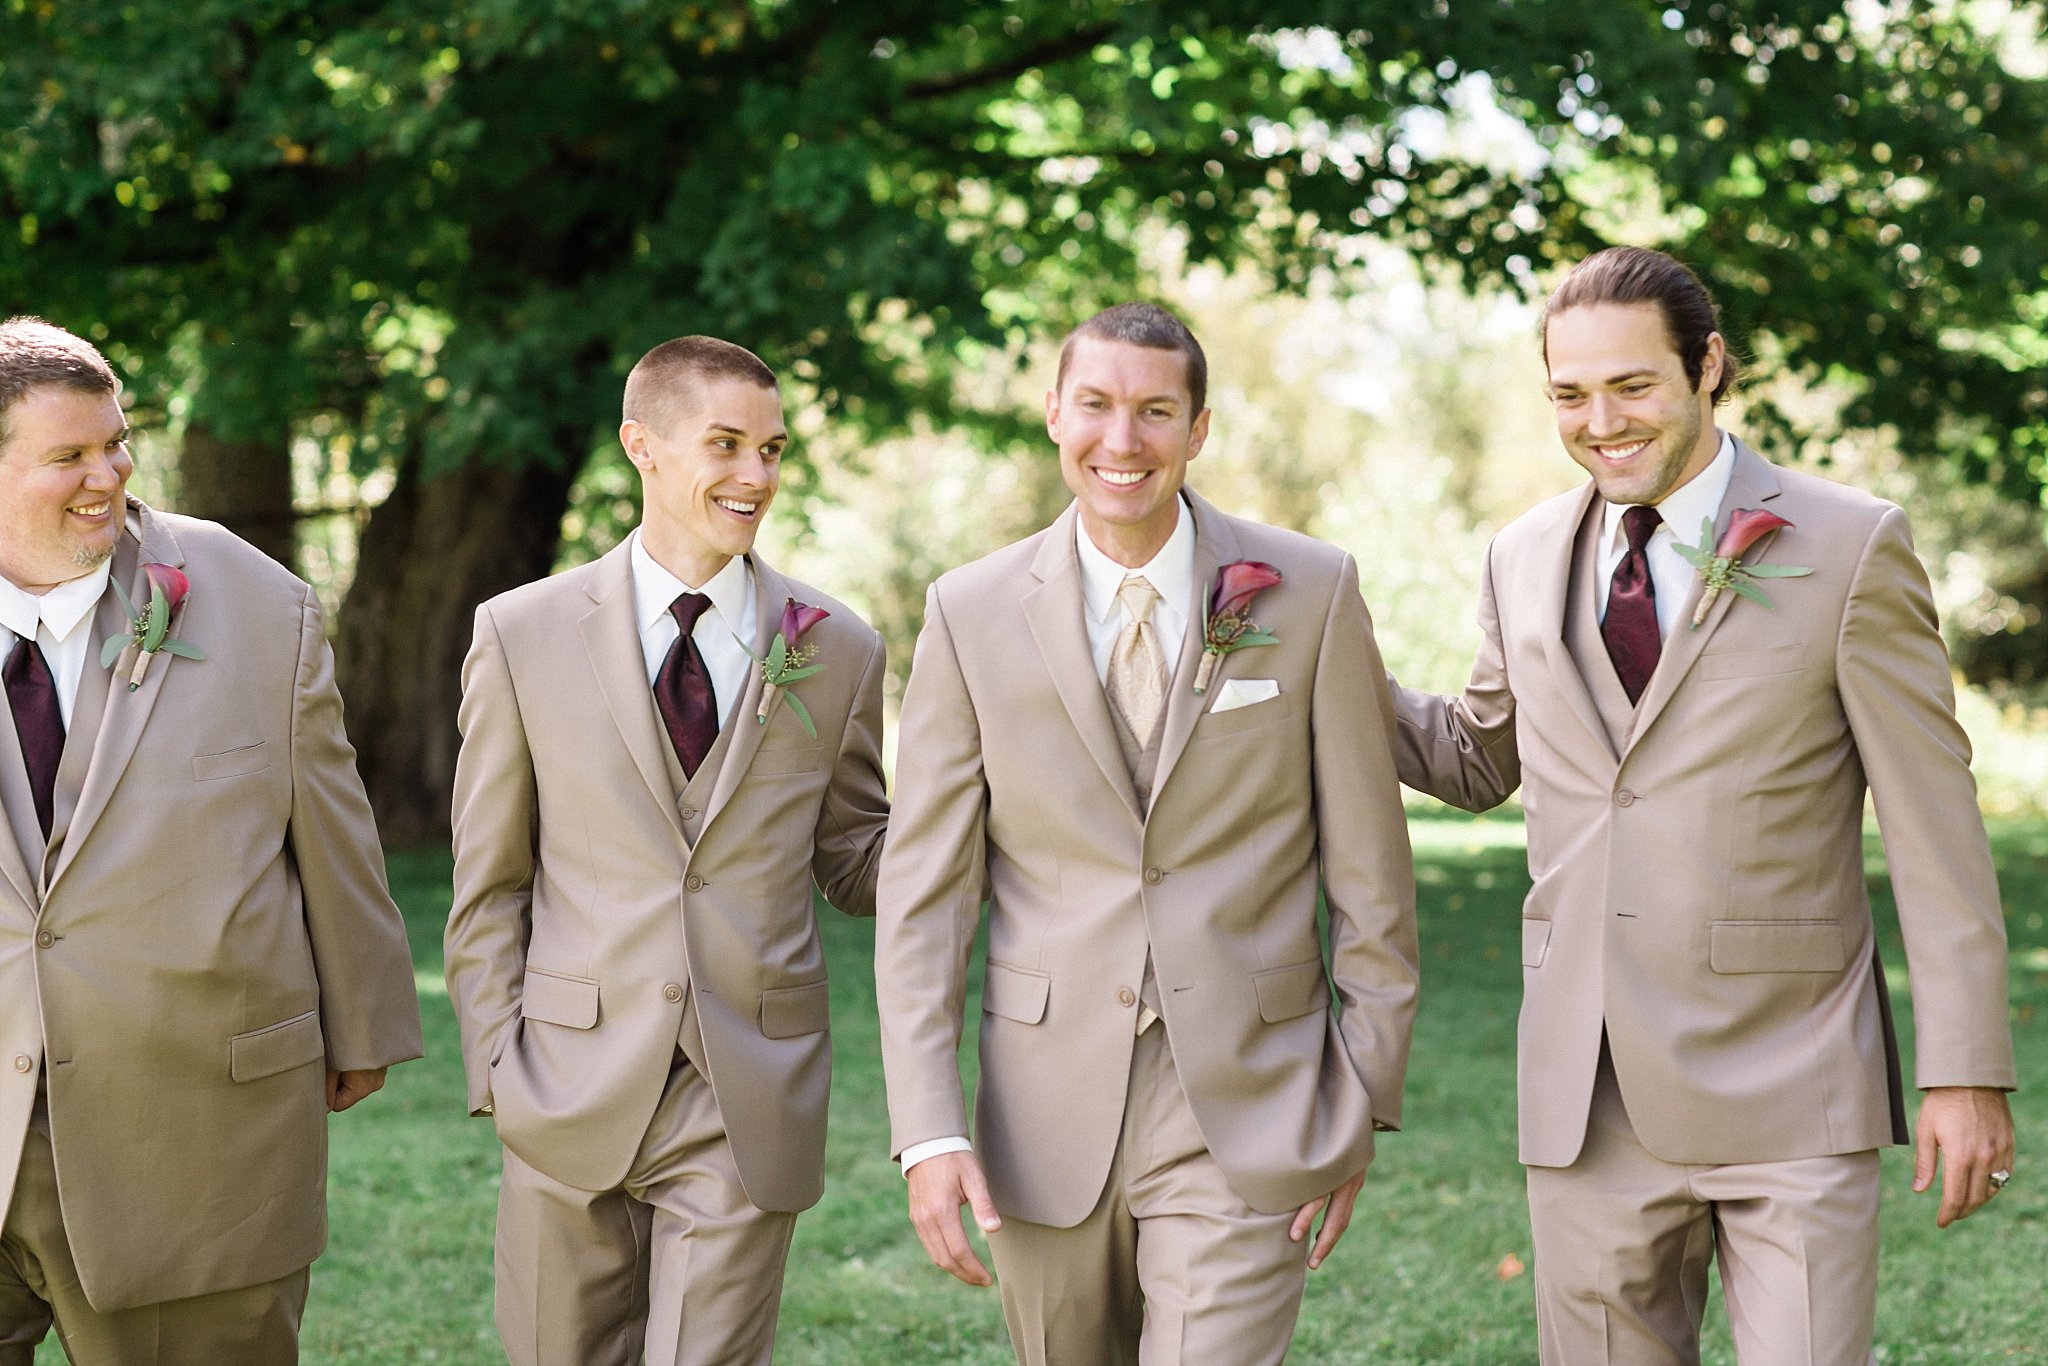 Country Groom wedding day suit